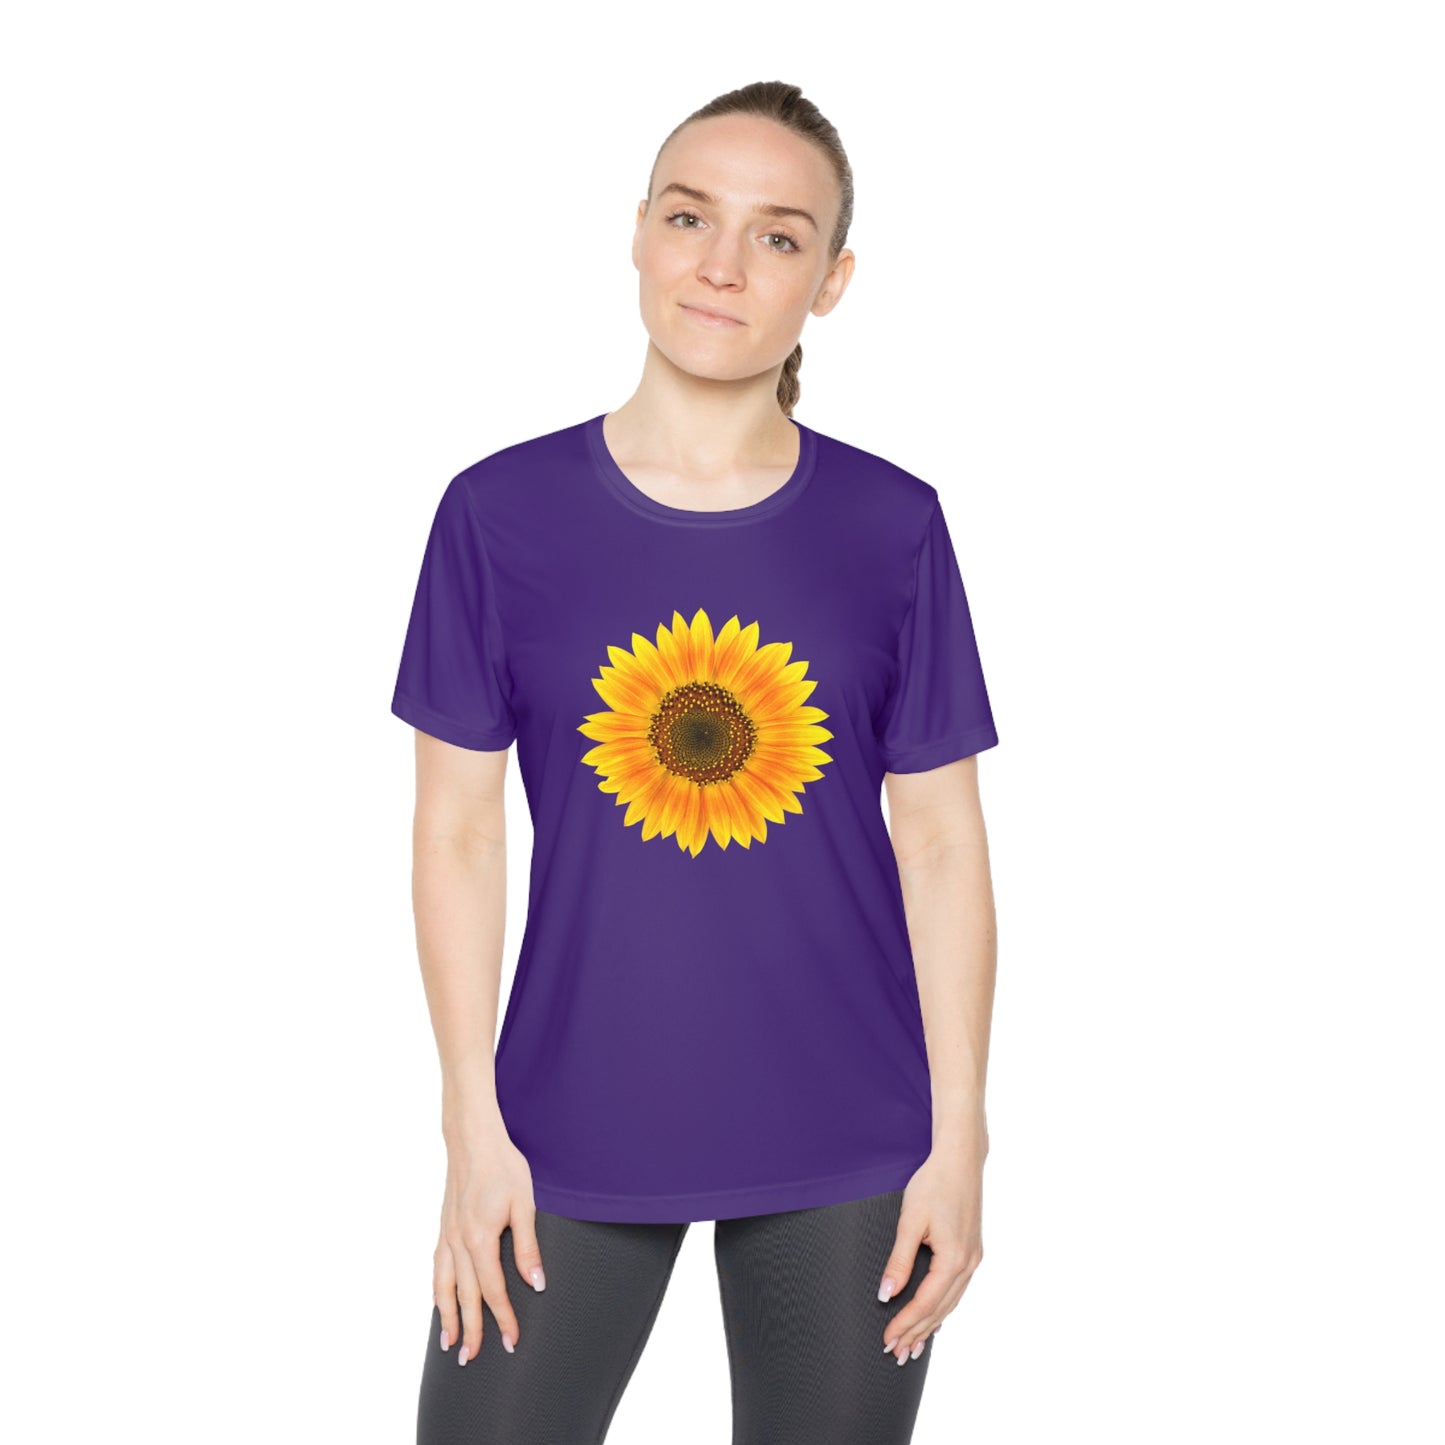 Mock up of a woman wearing the Purple shirt